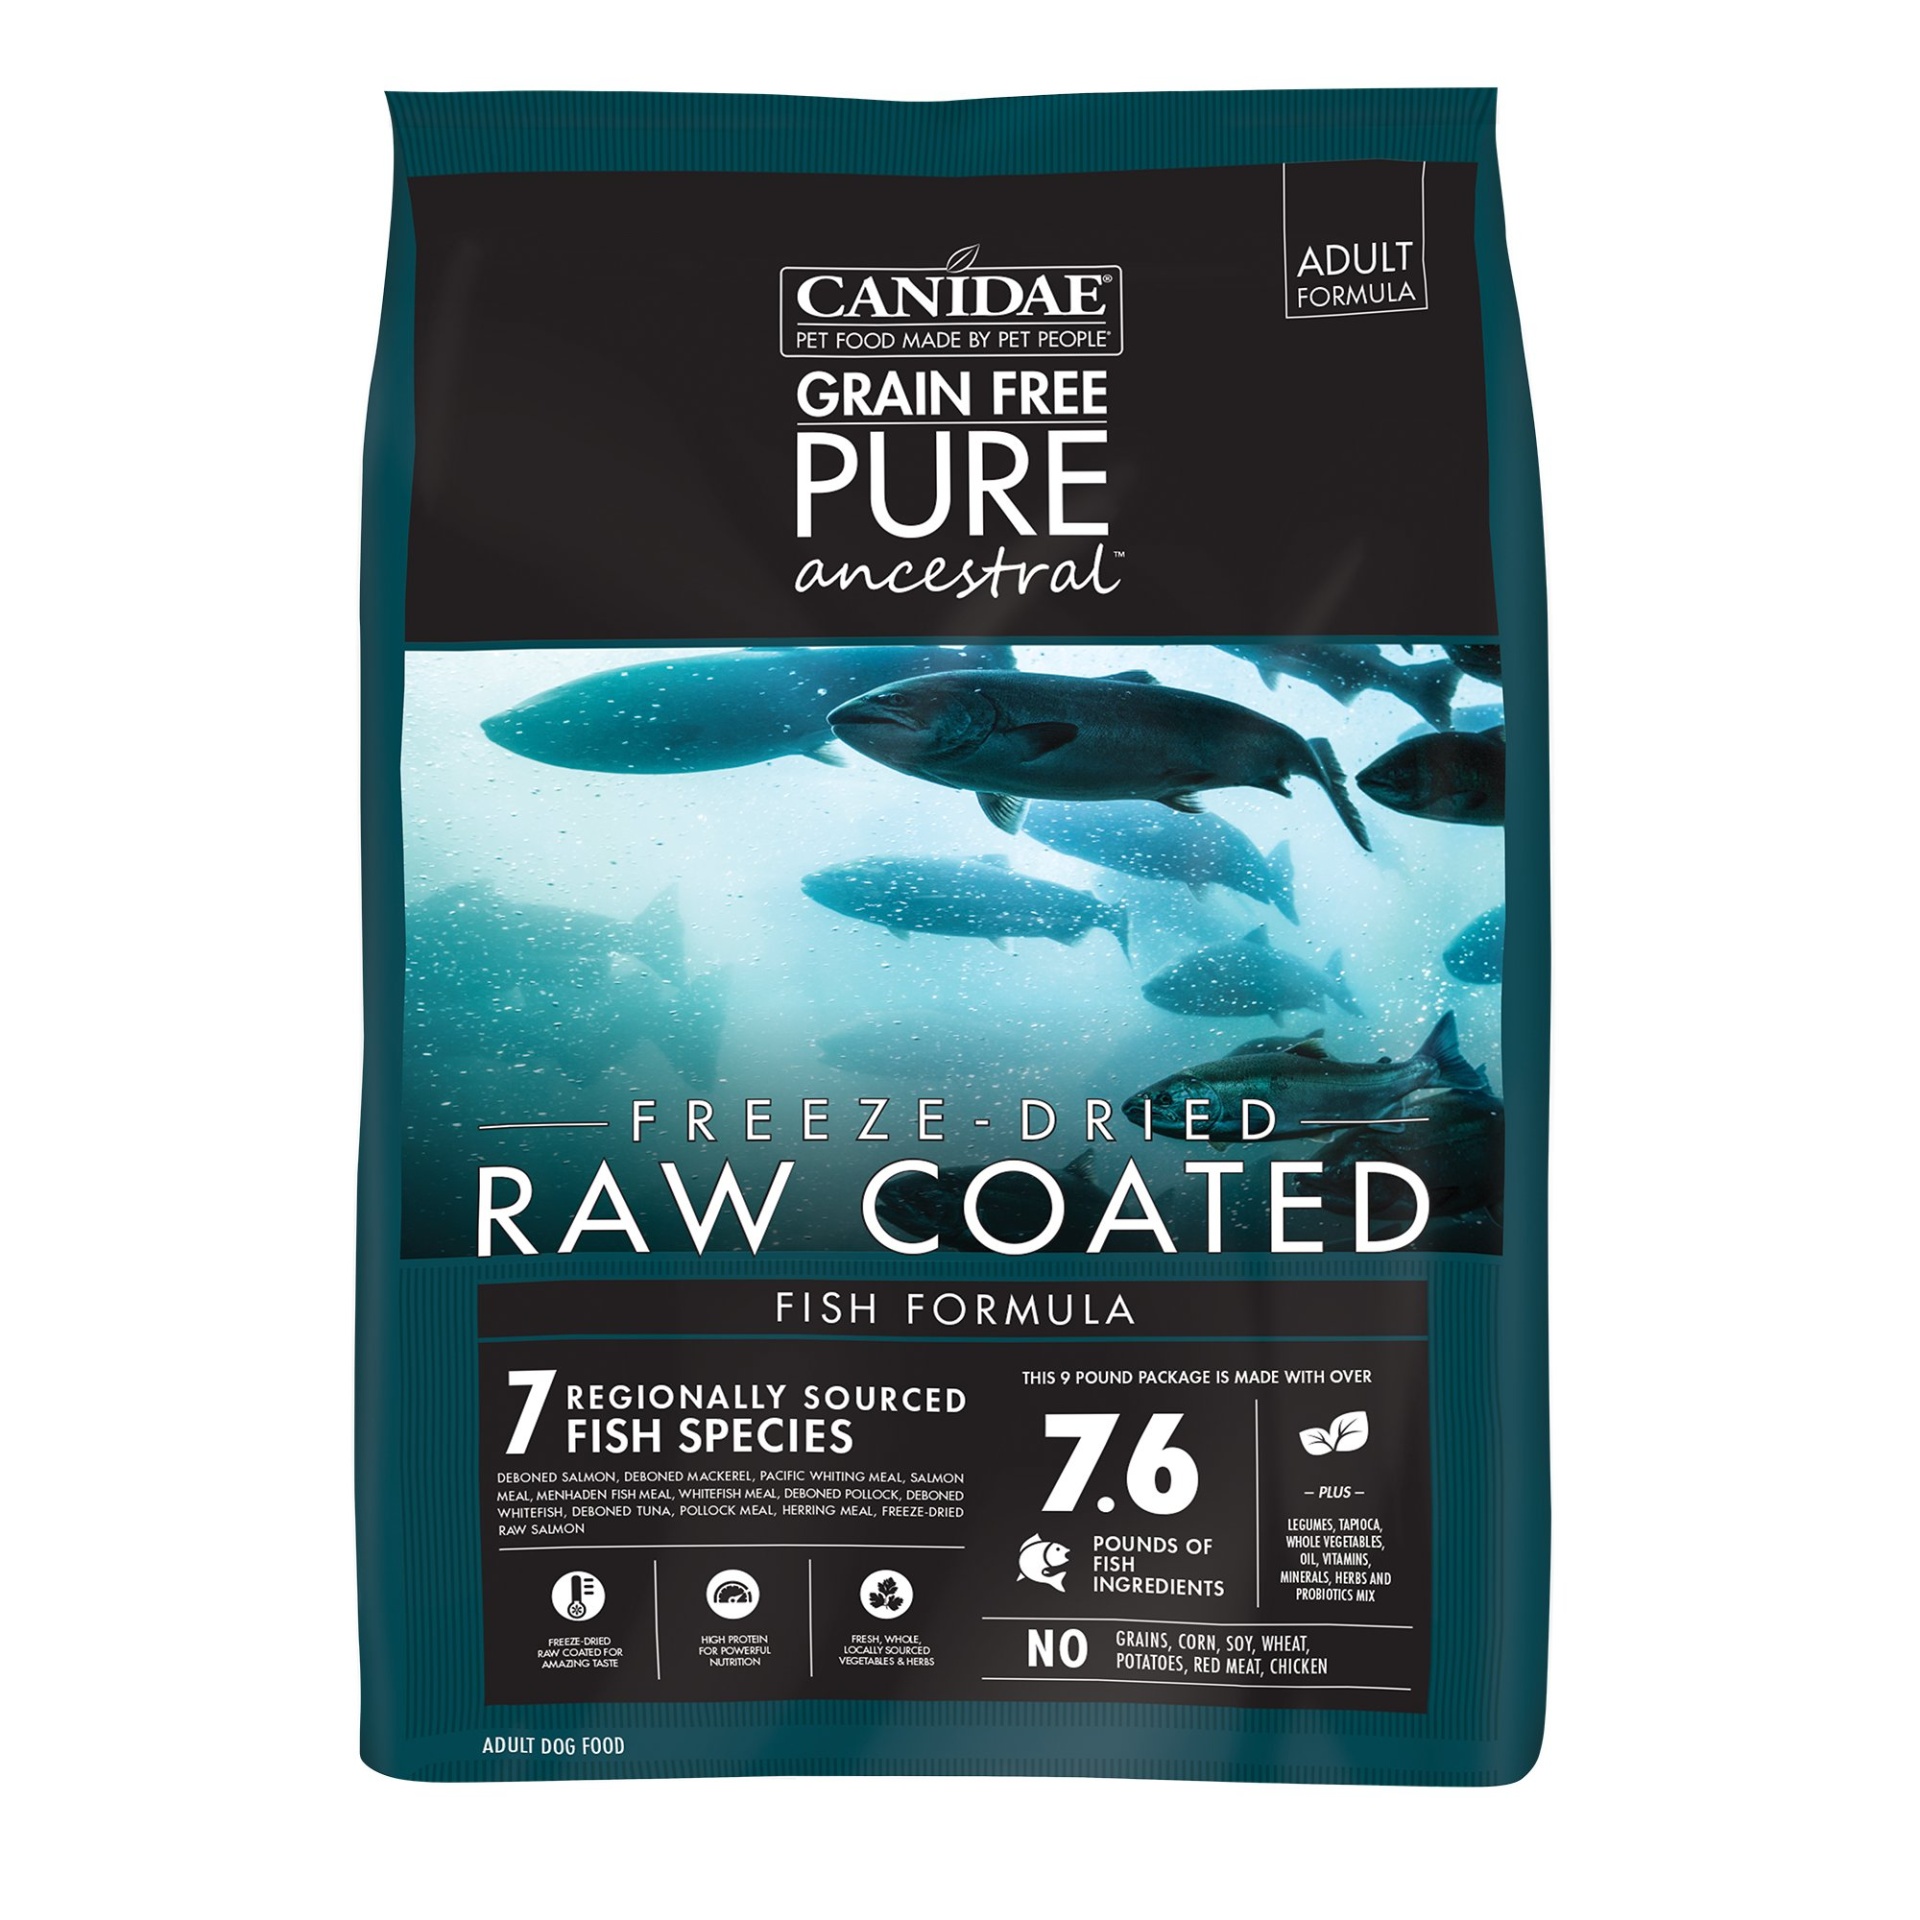 slide 1 of 1, CANIDAE Grain Free PURE Ancestral Diet Dog Dry Raw Coated Fish Formula with Salmon, Mackerel, & Pacific Whiting, 9 lb